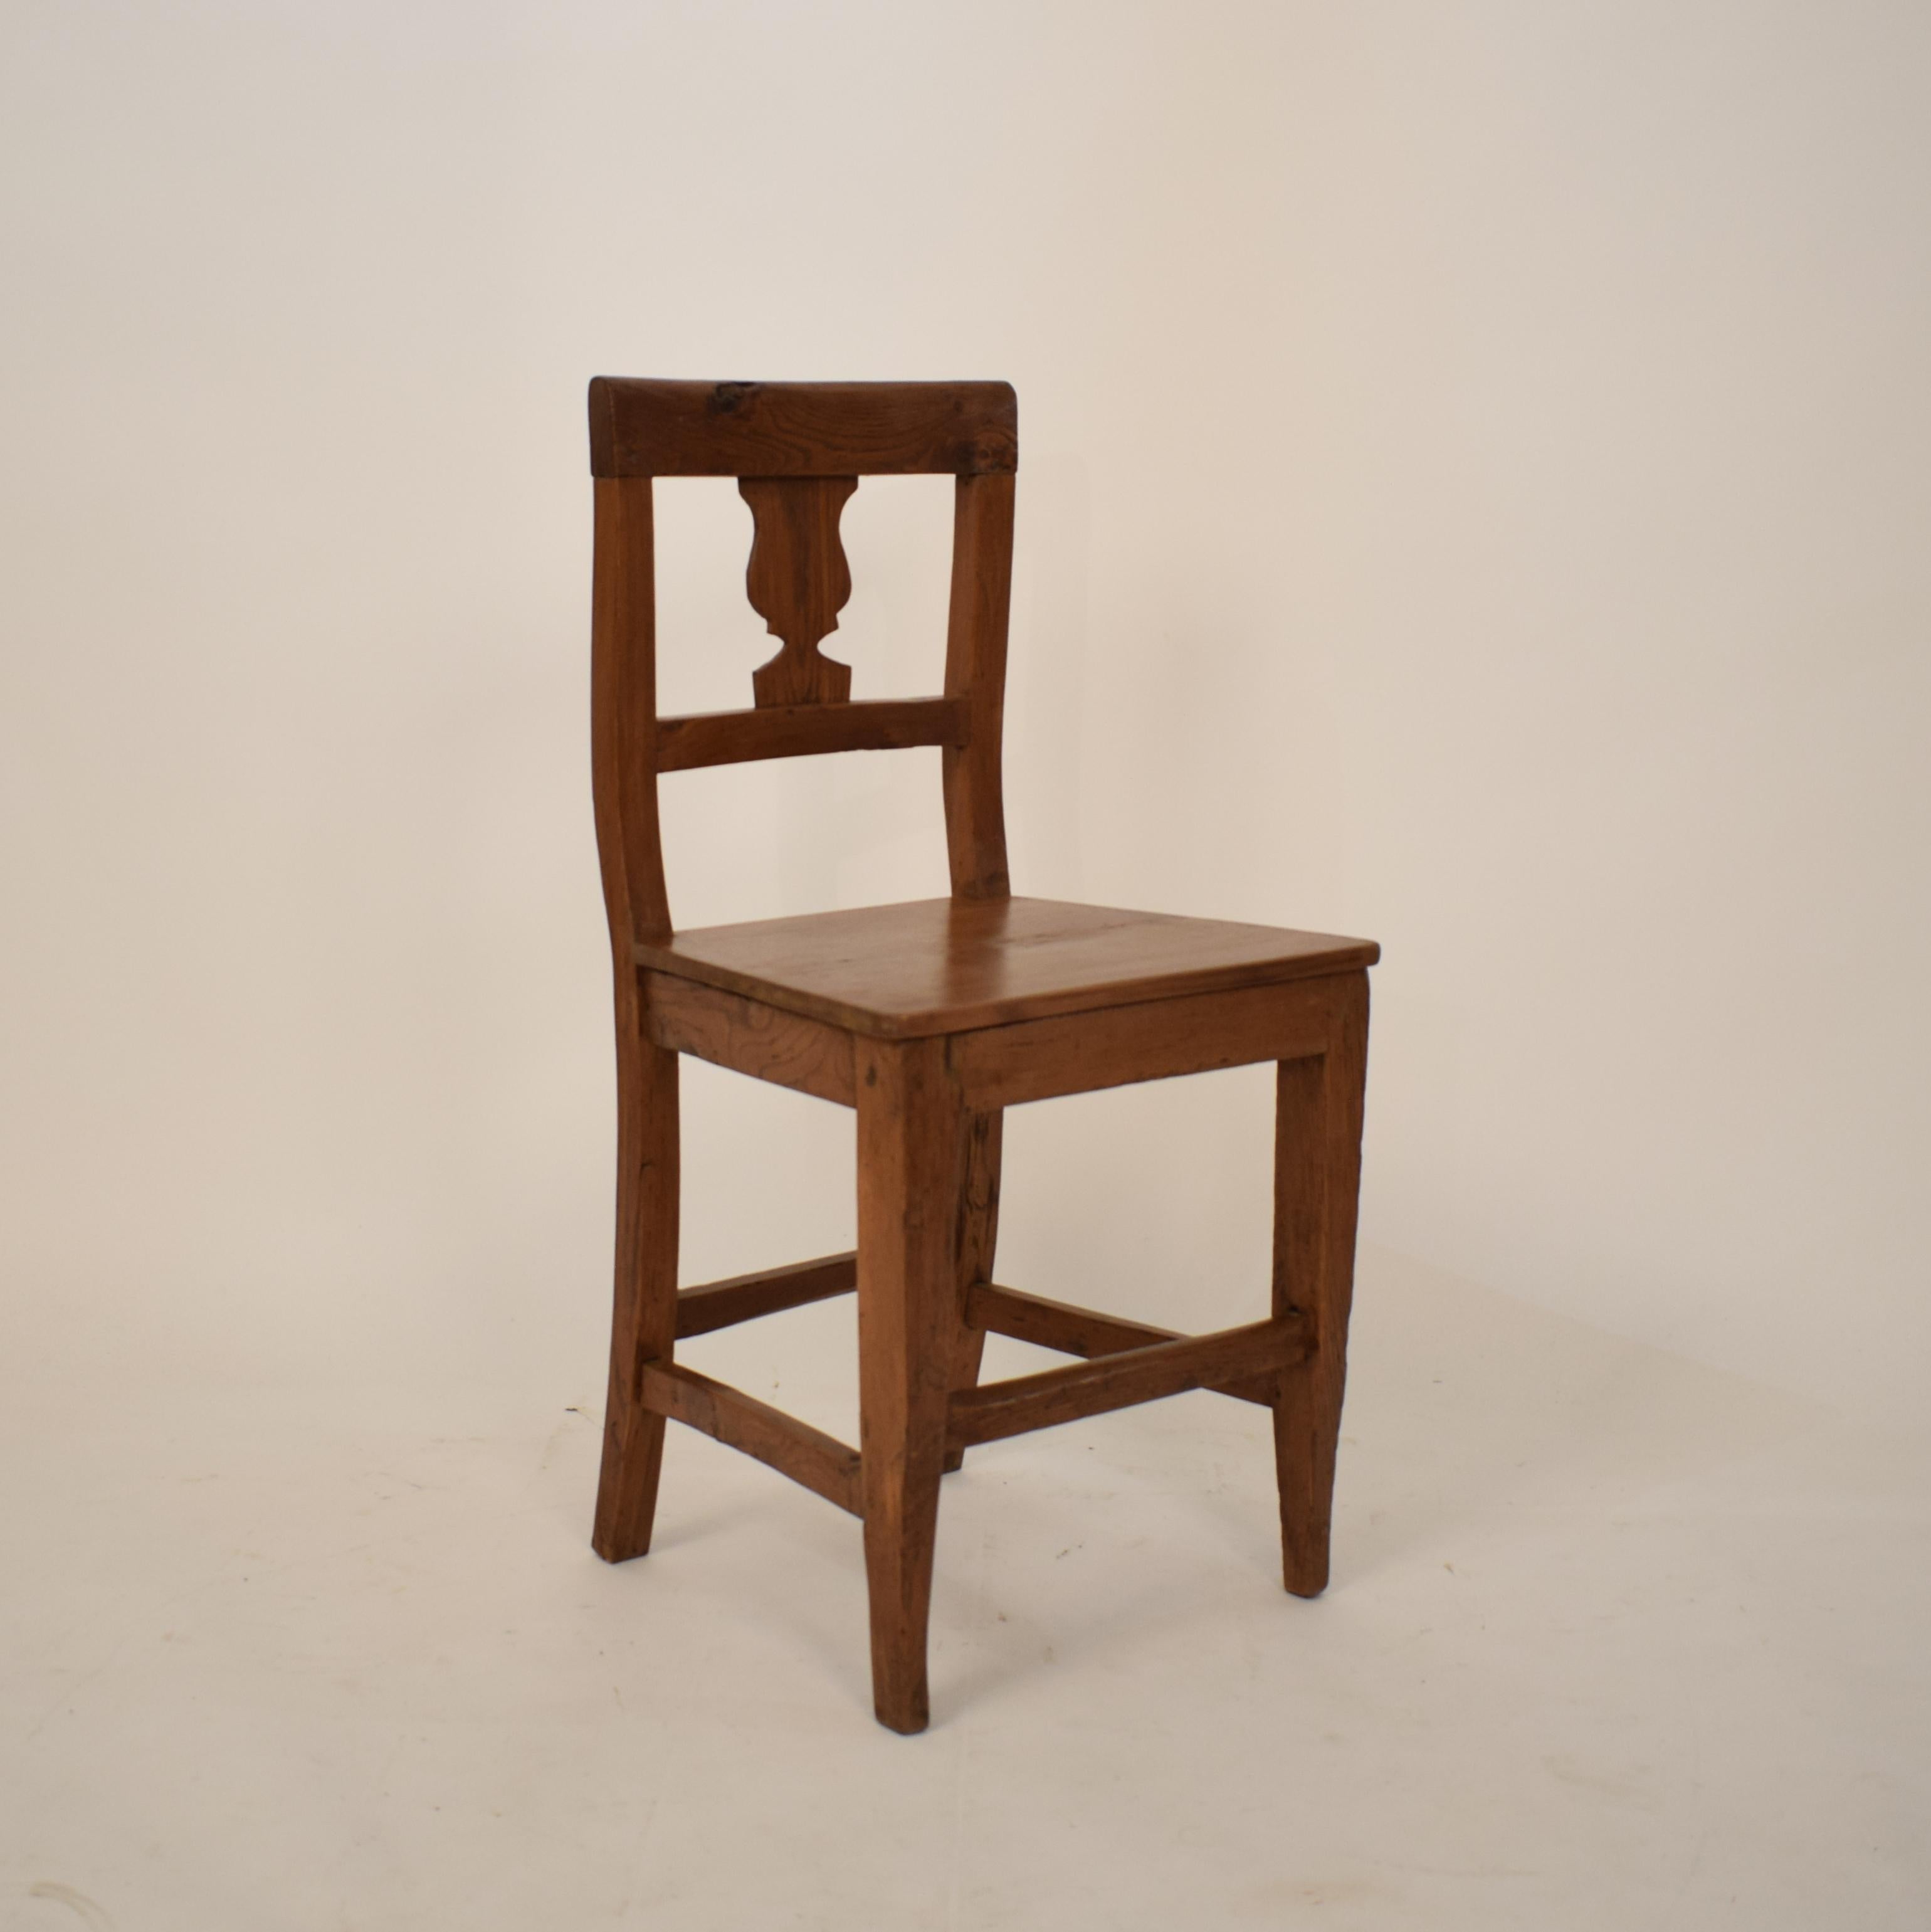 This beautiful 19th century Italian Biedermeier Wabi Sabi side or dining chair was built in 1820. The chair is made out of brown elm and walnut wood.
A unique piece which is a great eyecatcher for your antique, modern, space age or mid-century